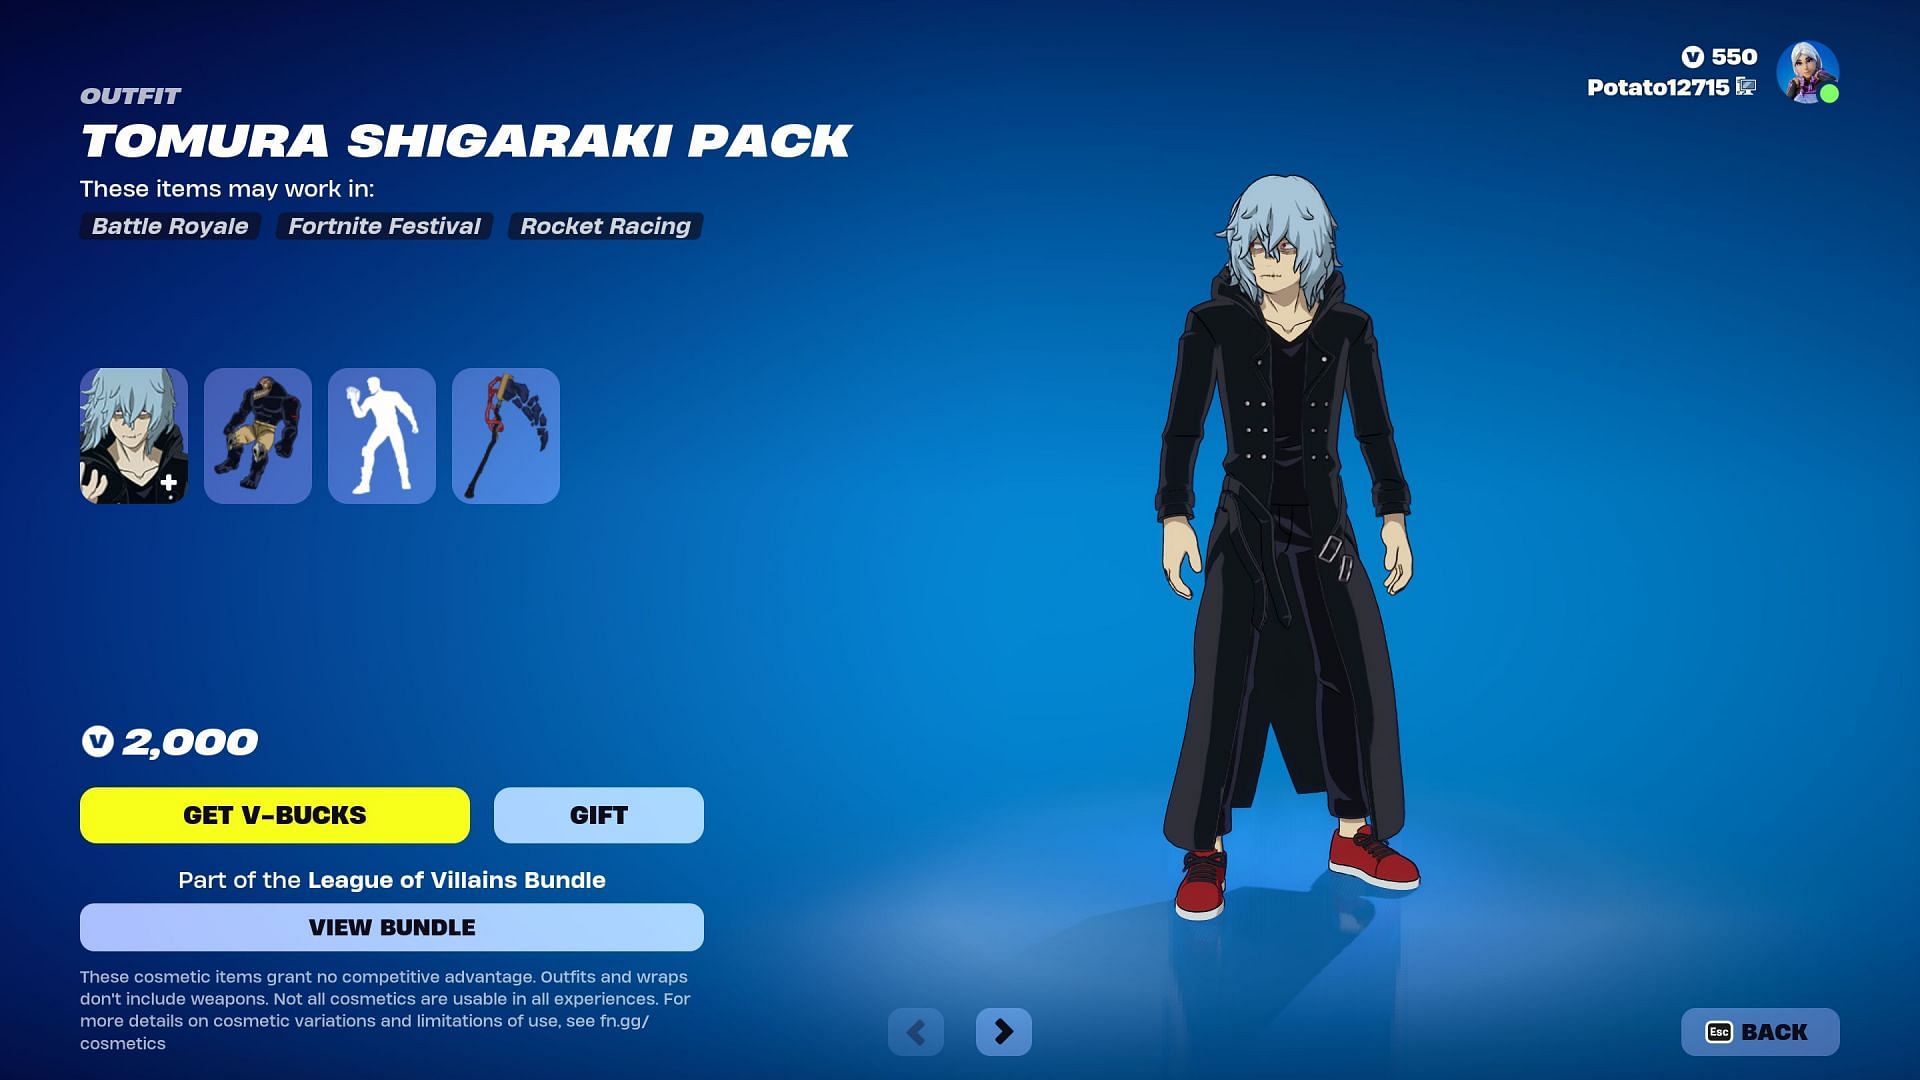 Tomura Shigaraki Pack is currently listed in the Item Shop (Image via Epic Games)